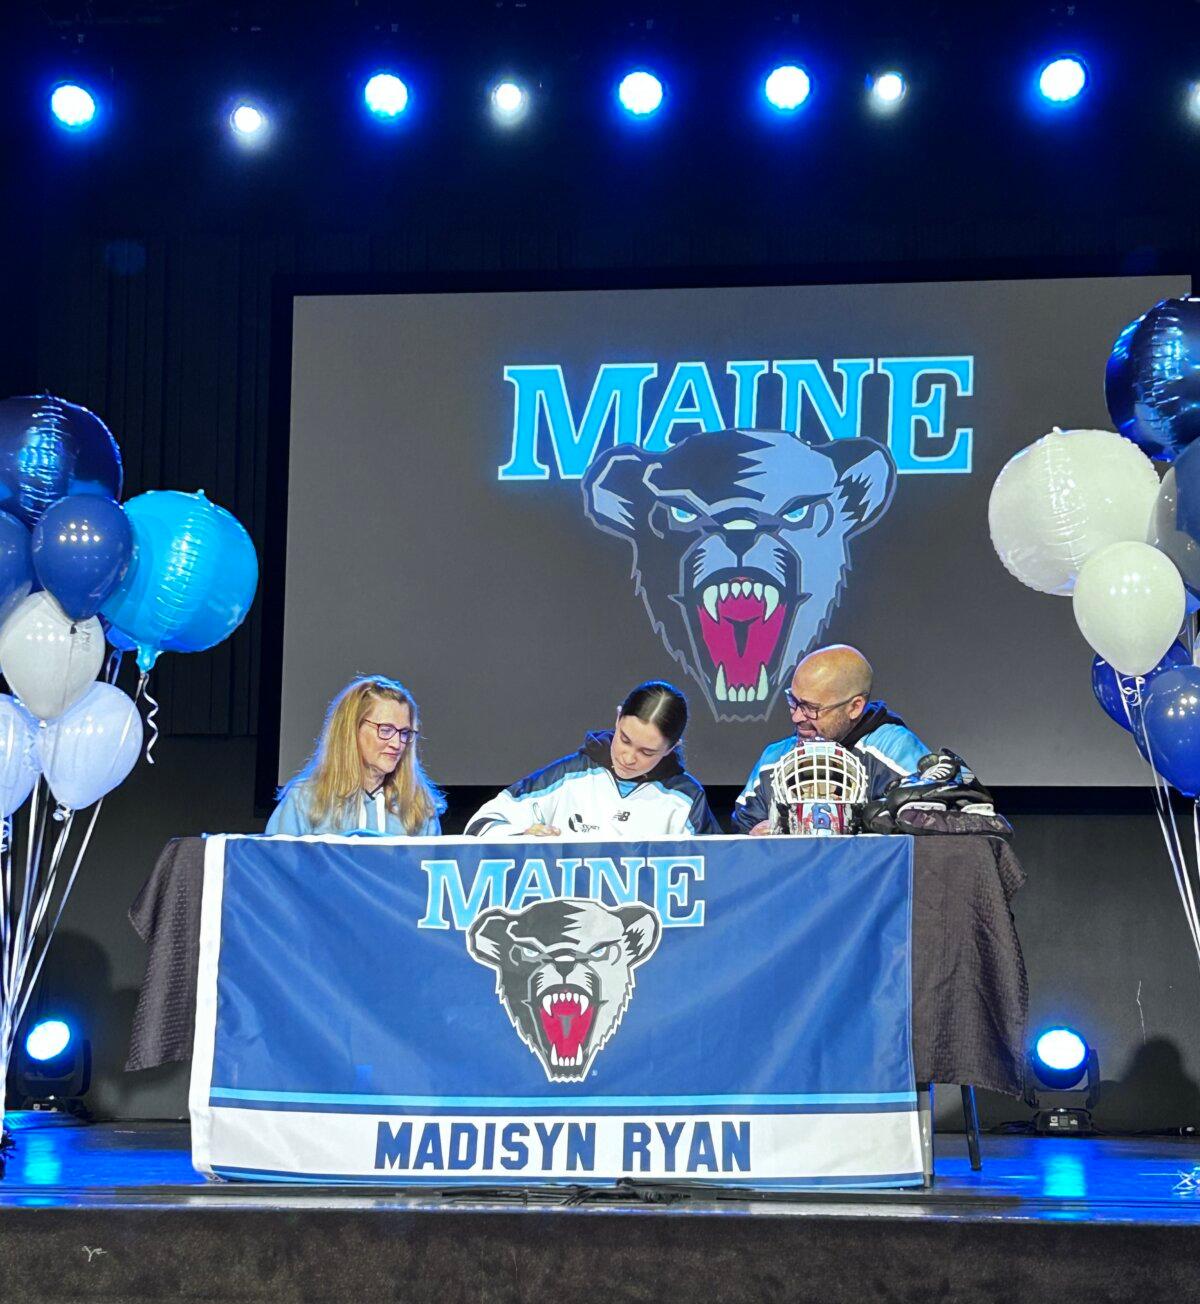 Madisyn Ryan, a 17-year-old senior at Crossroads Christian High School in Corona, Calif., who has committed to play women’s college hockey at the University of Maine. (Courtesy of Madisyn Ryan)